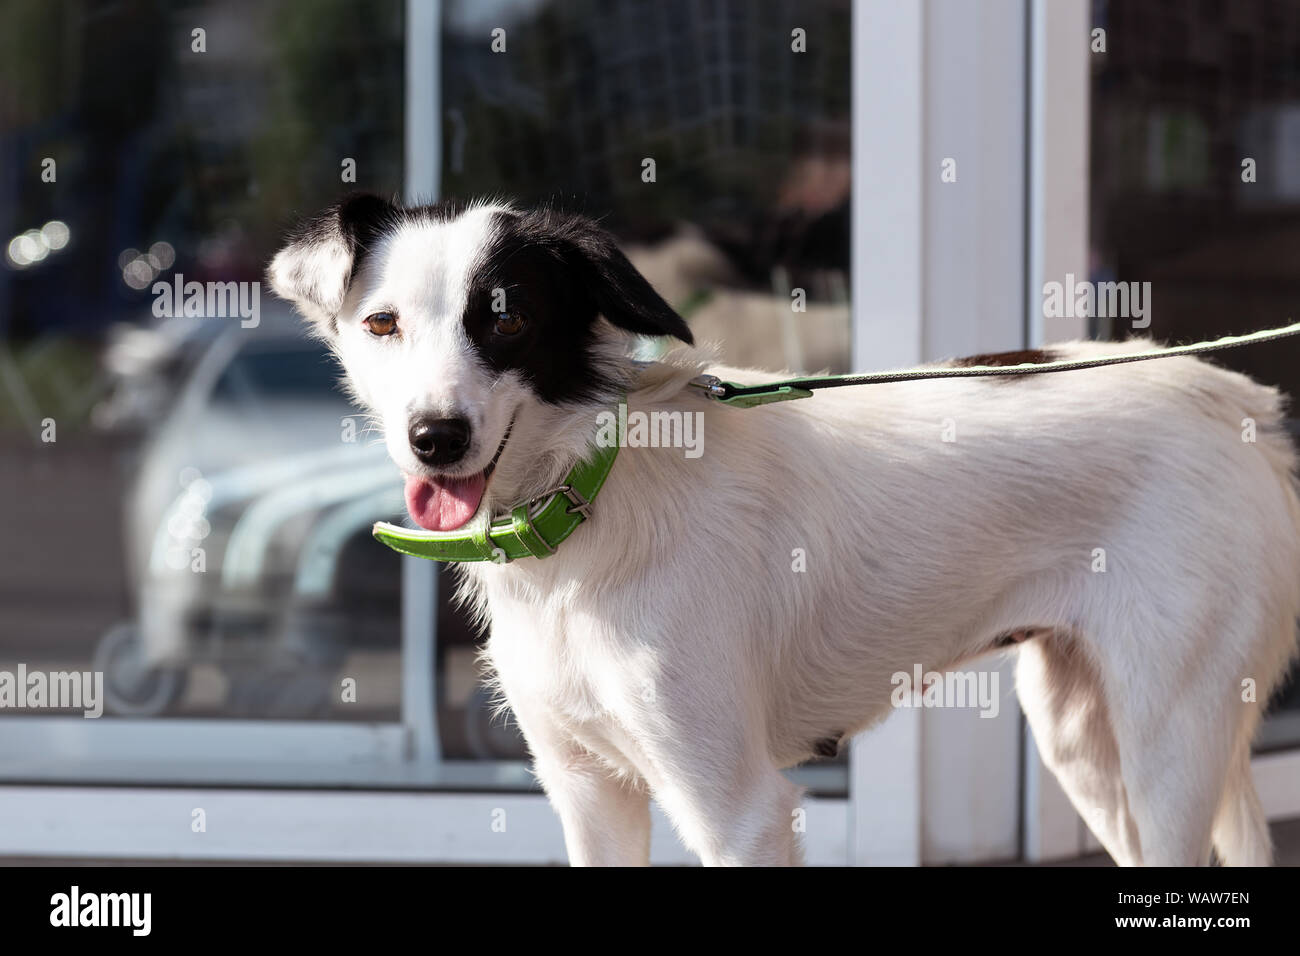 Beautiful dog is waiting for the owner near the store. Cute white animal on a green leash with black spots and opened mouth. Dog showing tongue. Stock Photo